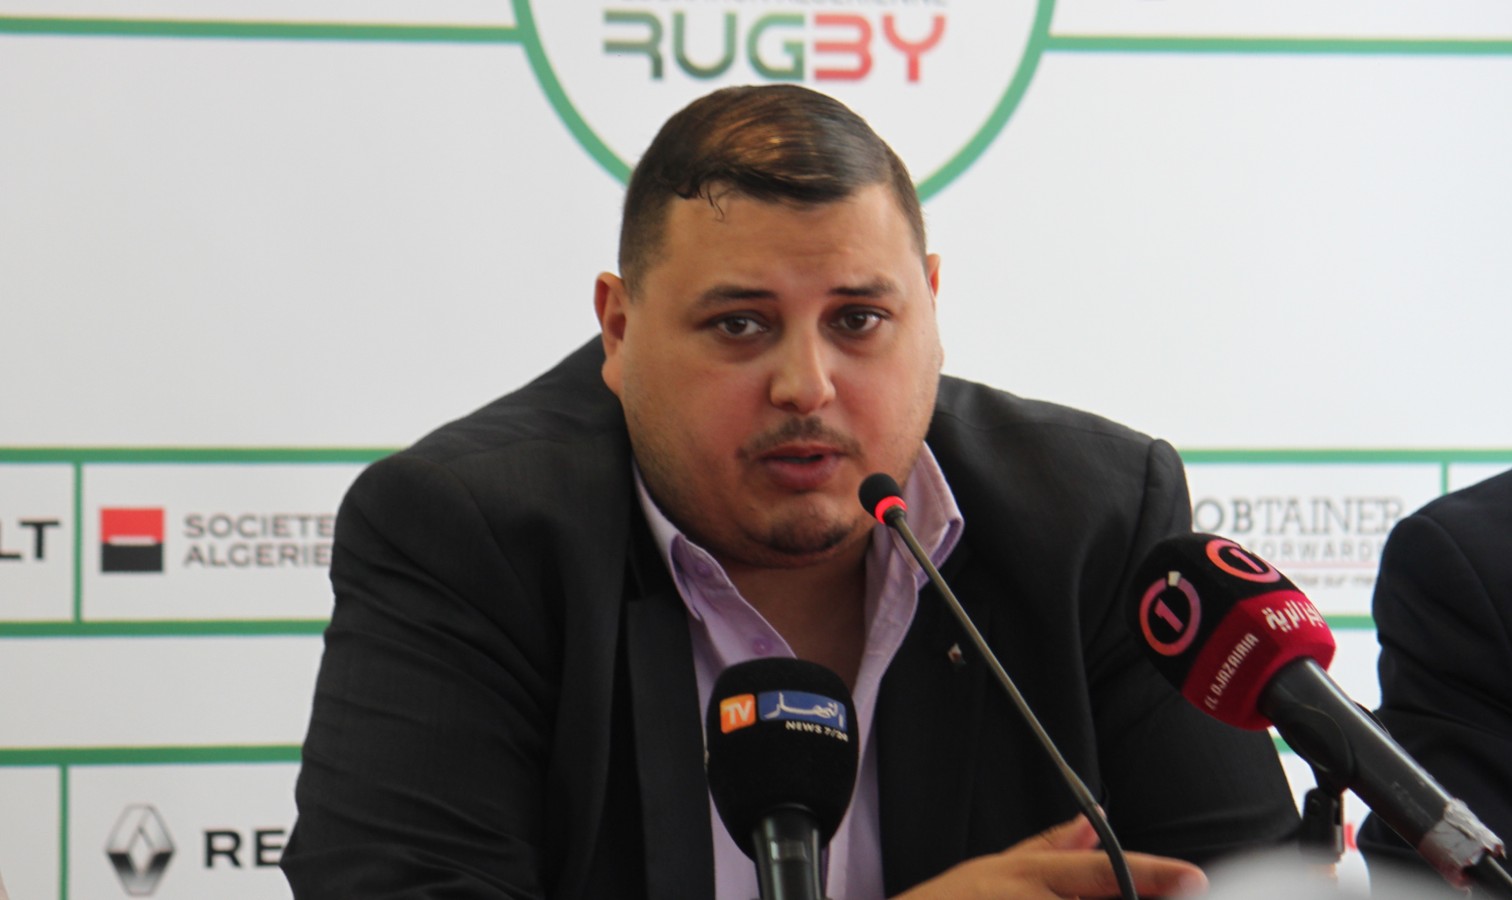 conference rugby sg benhassen sofian